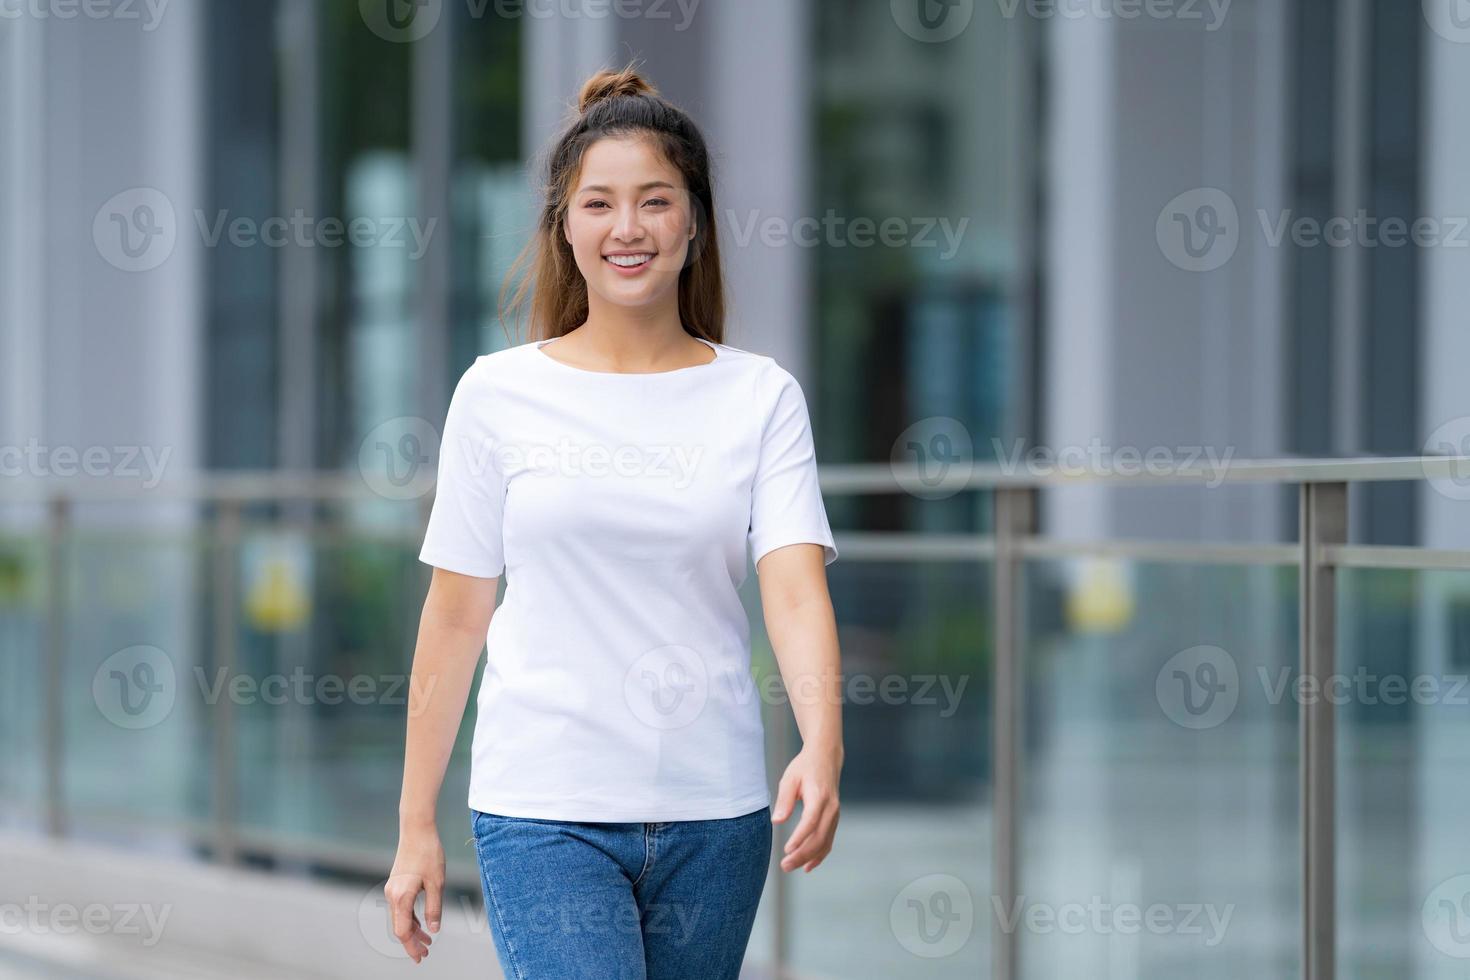 Woman in white t shirt and blue jeans photo